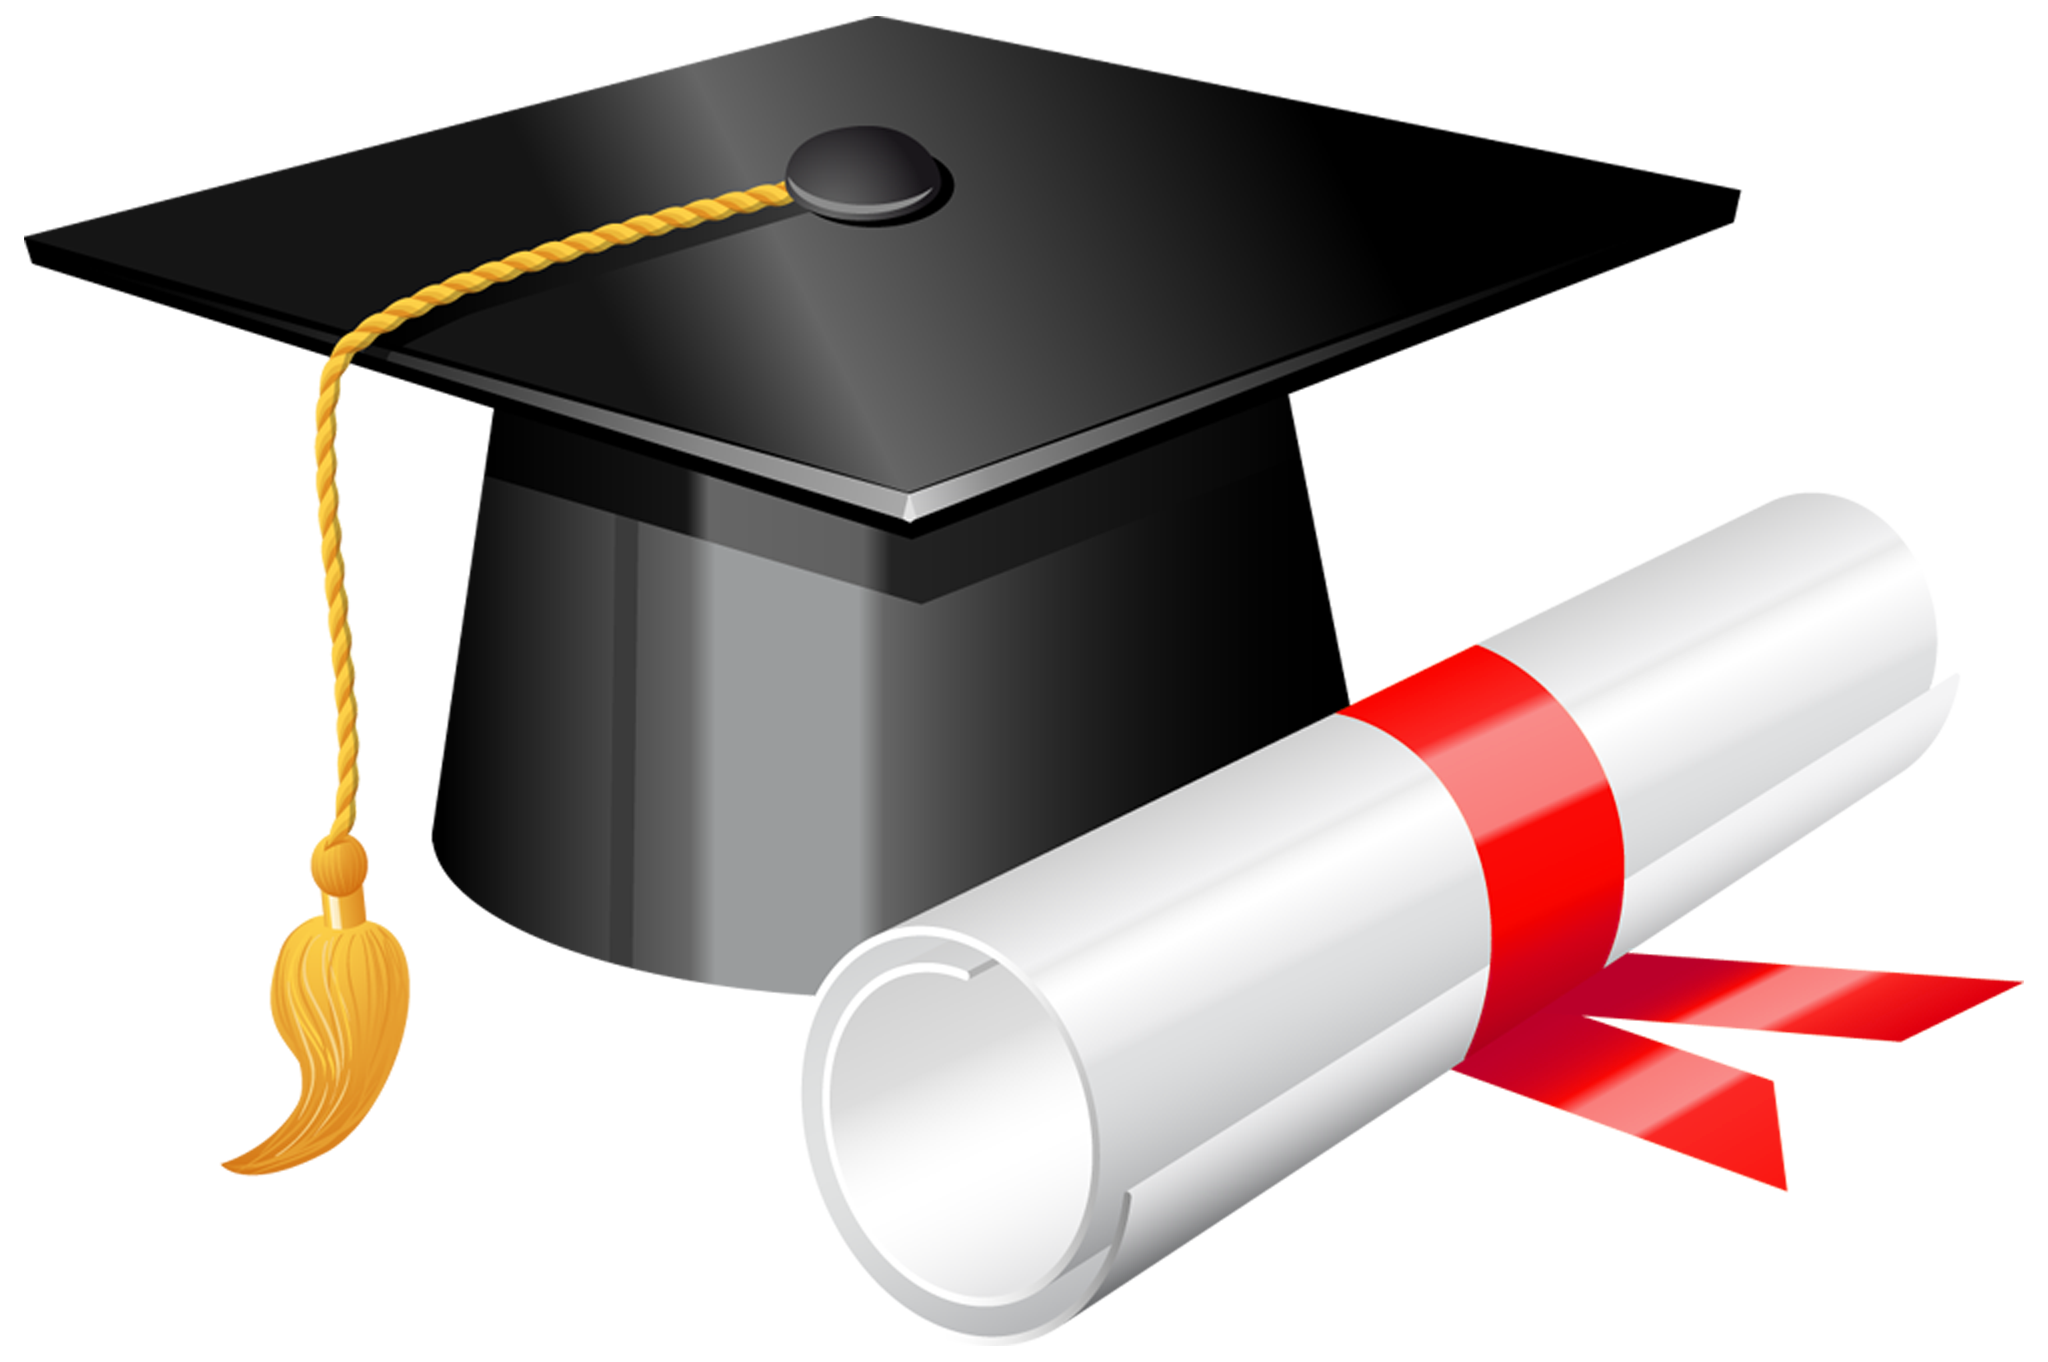 Graduation Cap Clipart Printable And Other Clipart Images On Cliparts Pub™